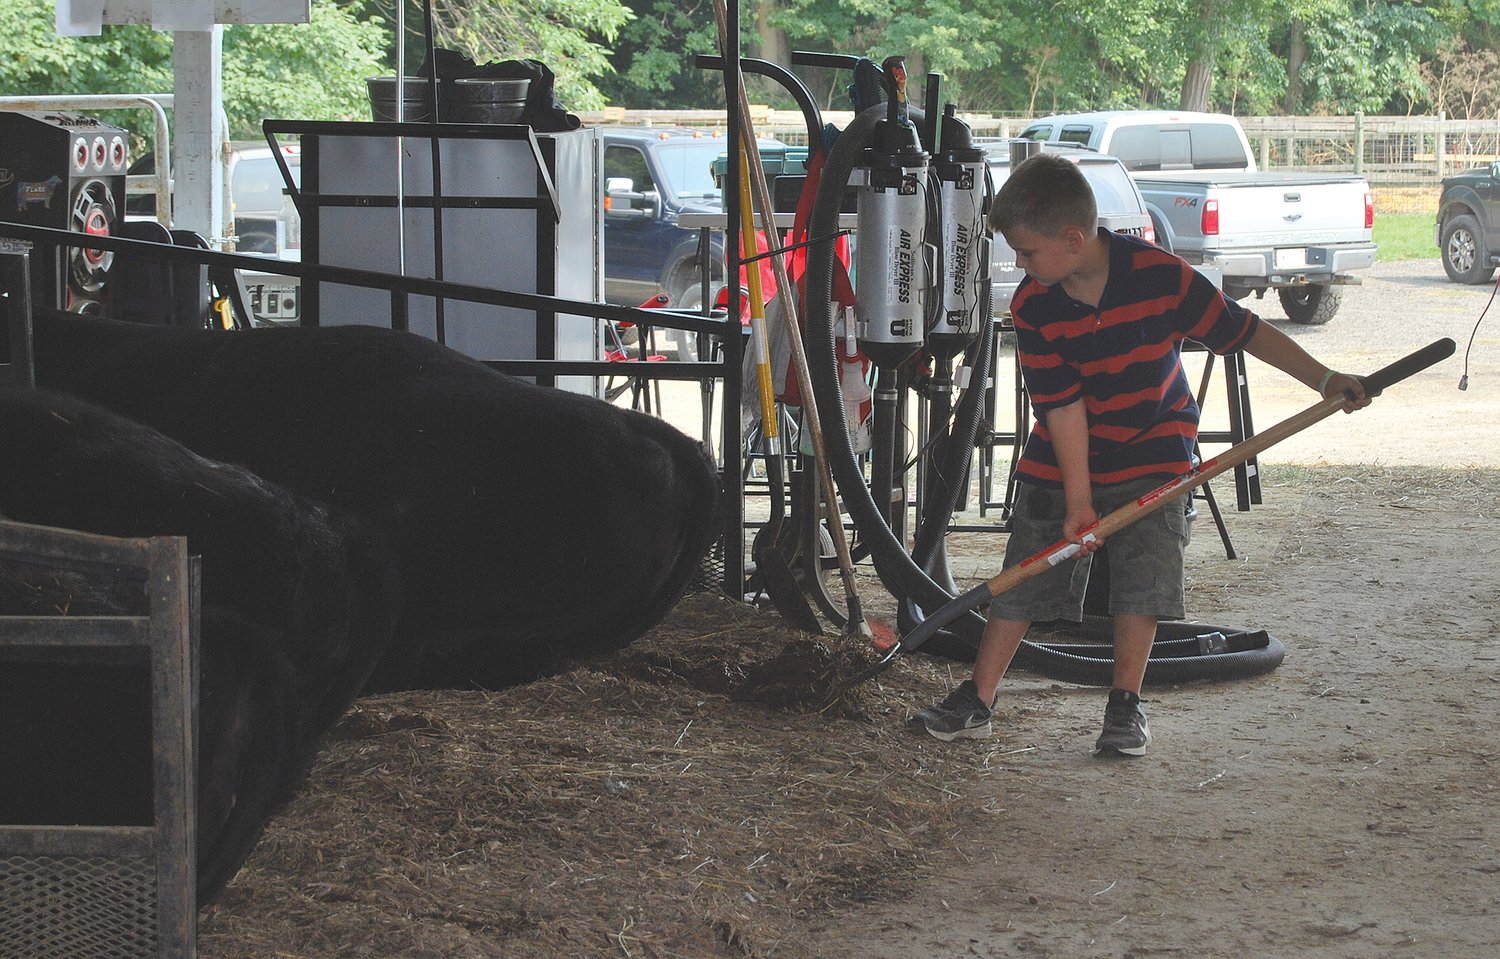 A 4-H member cleans up after his cow.